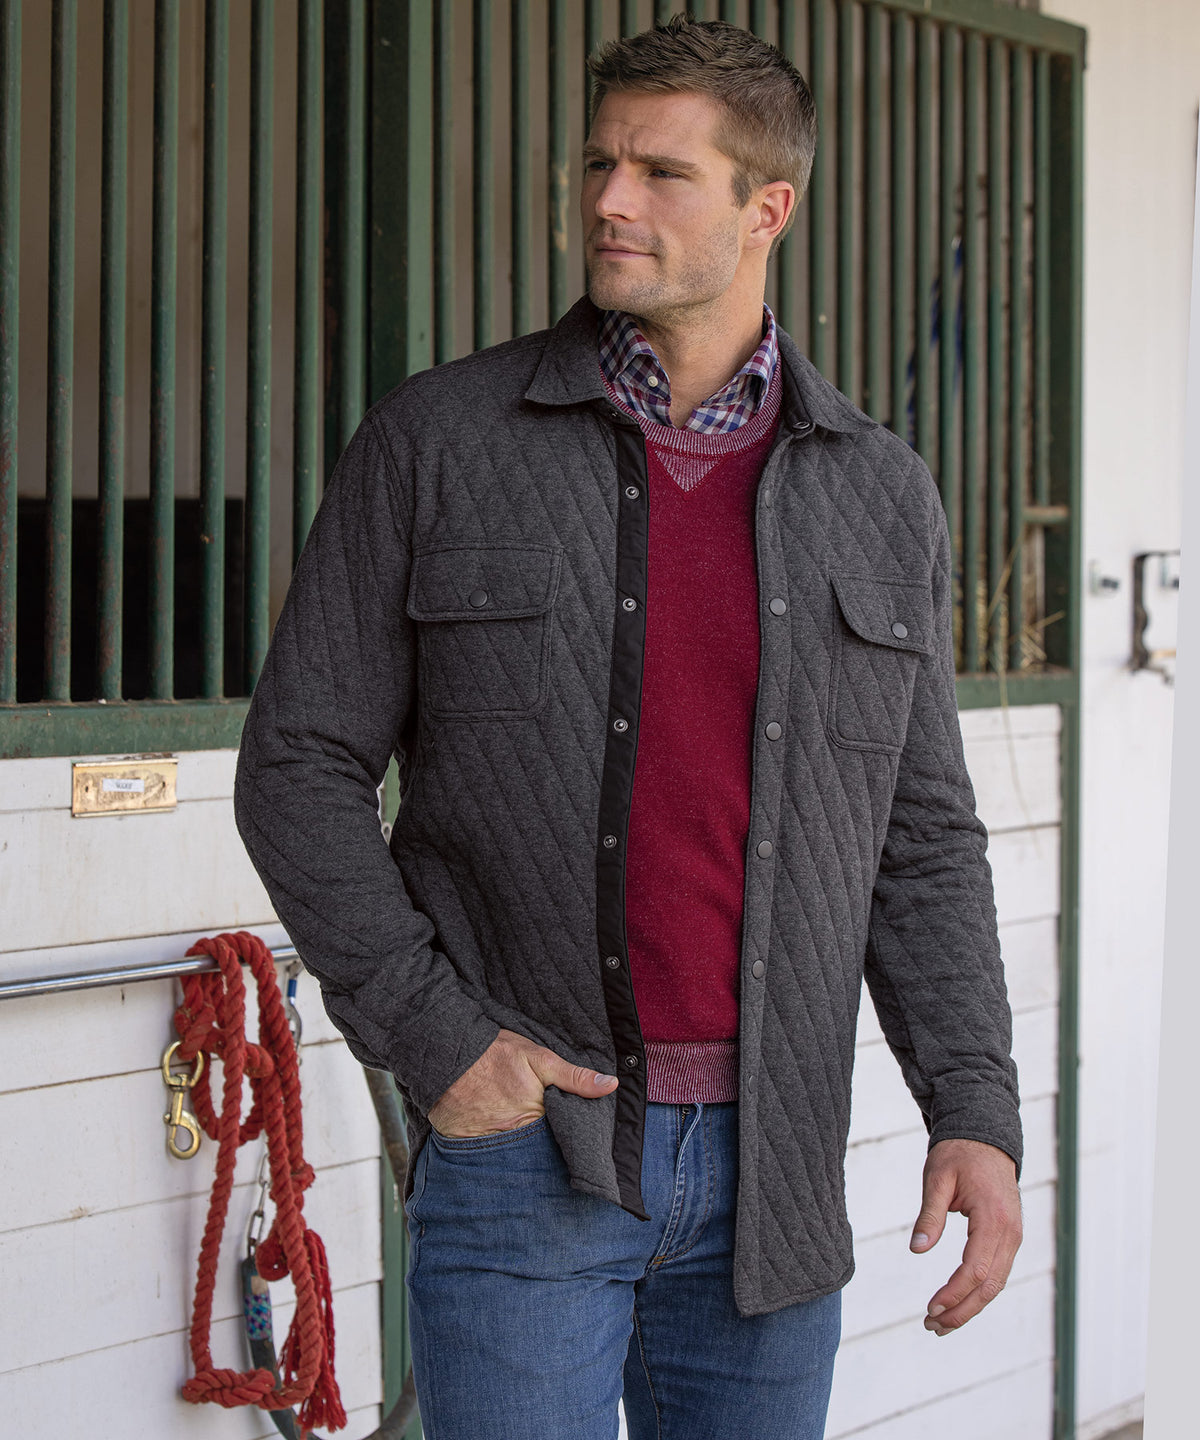 Westport Lifestyle Quilted Knit Shirt Jacket